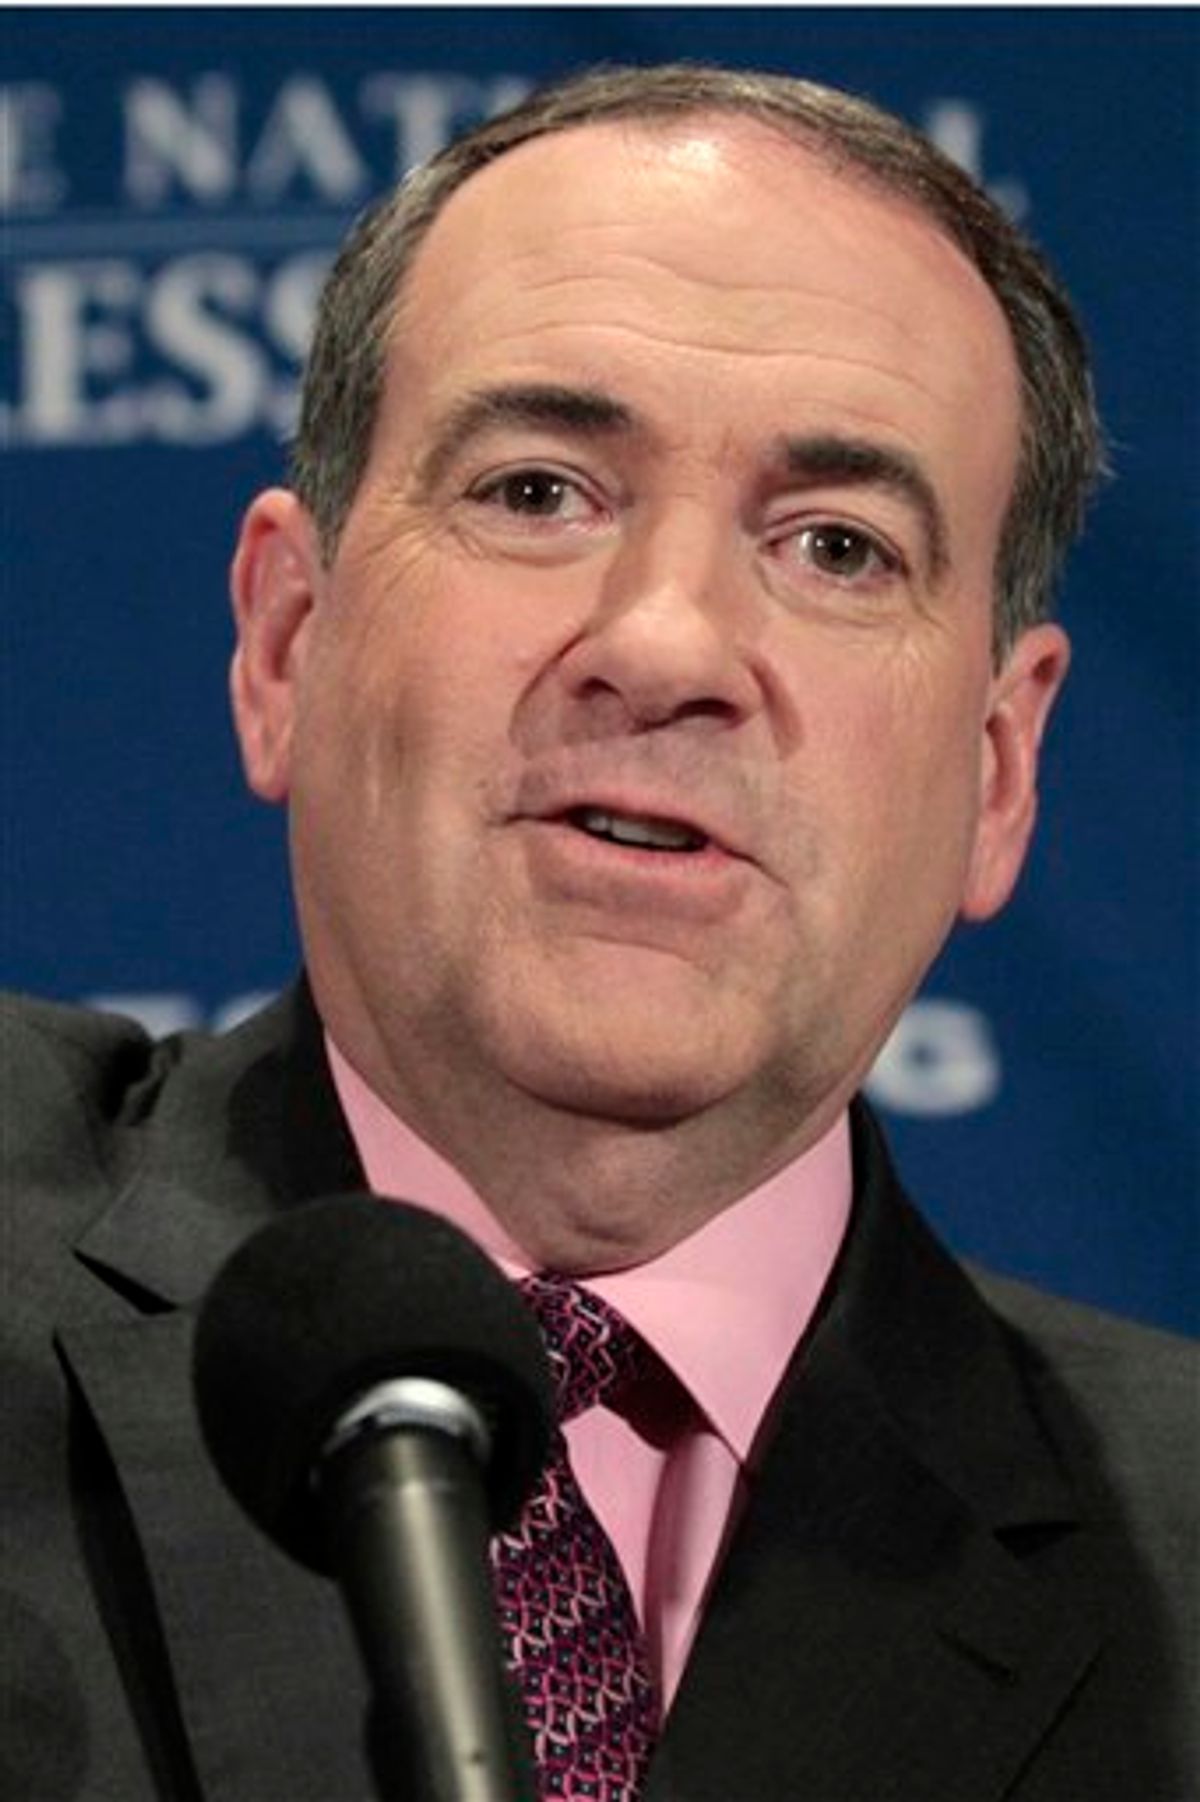 FILE - This Feb. 24, 2011 file photo shows former Arkansas Gov. Mike Huckabee in Washington. Huckabee's decision on whether to move toward another run for president -- which he'll announce on his television show Saturday night, May 14, 2011 -- may come down to whether he's willing to cut back those revenue streams to put his political career first again. His top advisers say he hasn't told them what he'll do, which makes them think he's probably going to stick with the money, rather than go for the White House.    (AP Photo/Alex Brandon, File) (AP)